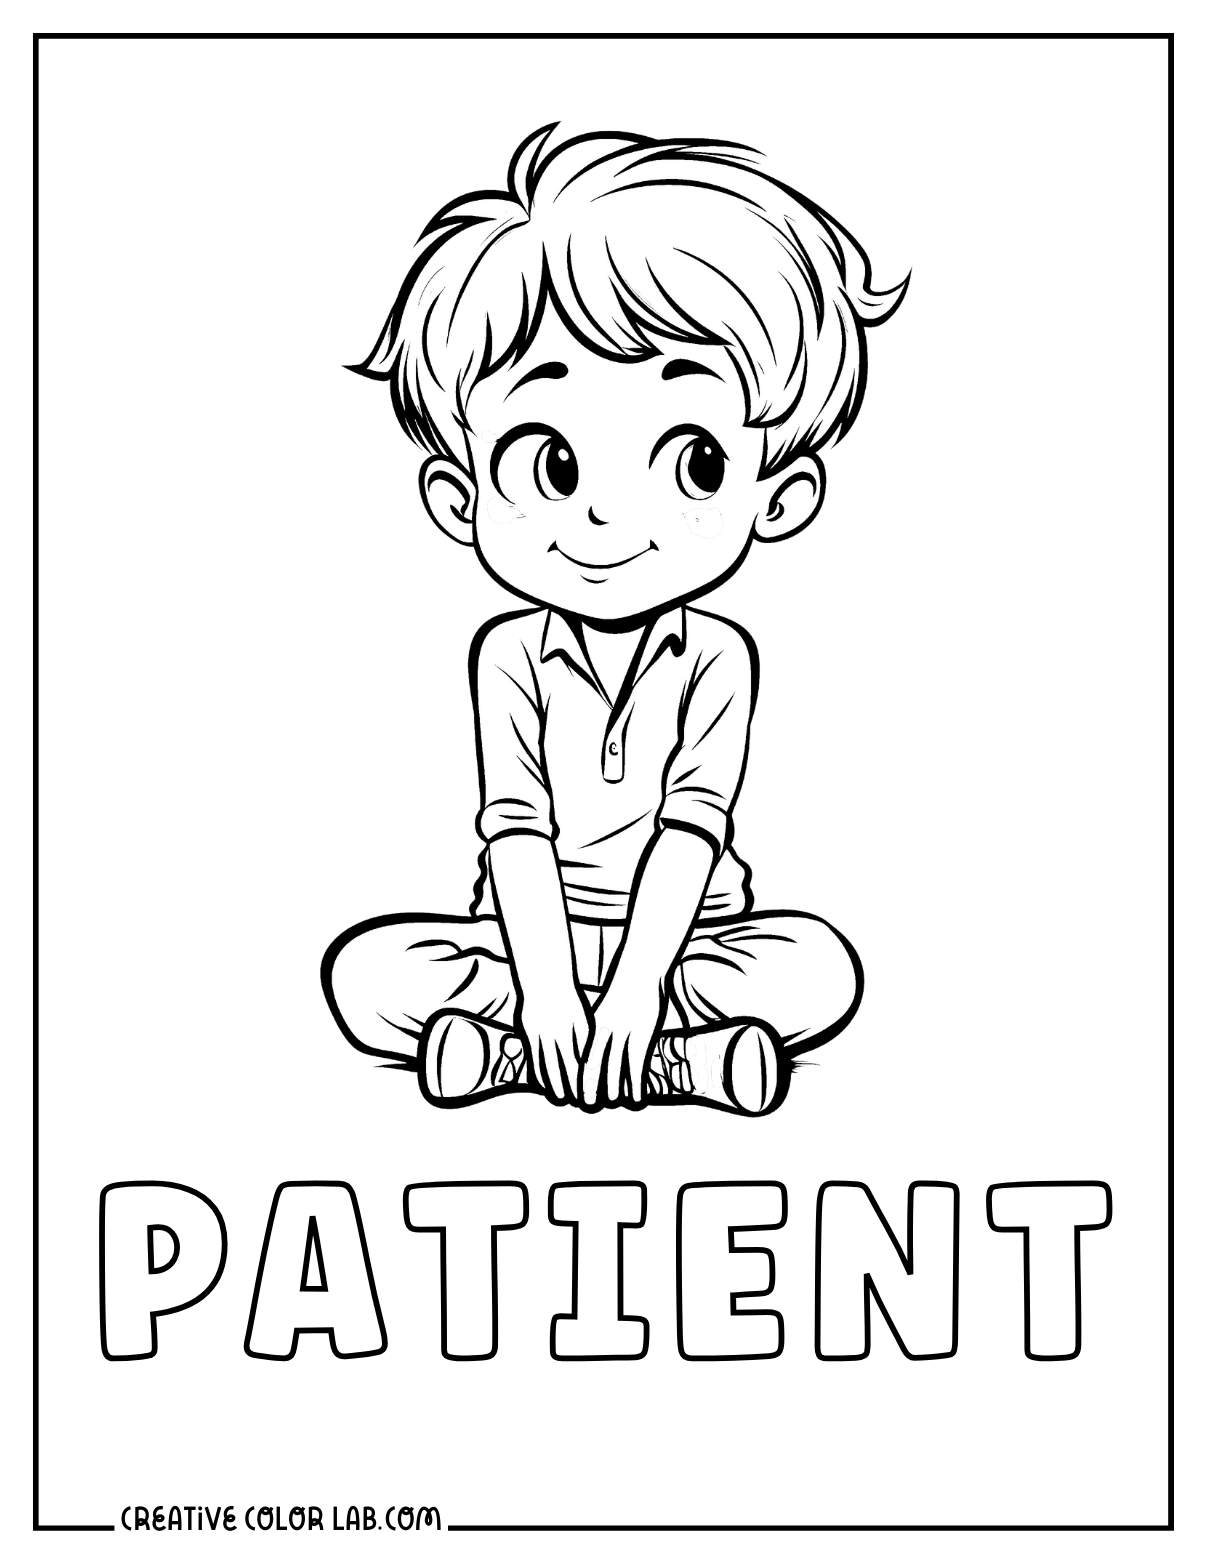 Emotional coloring sheet PDF about patience for kindergarten.